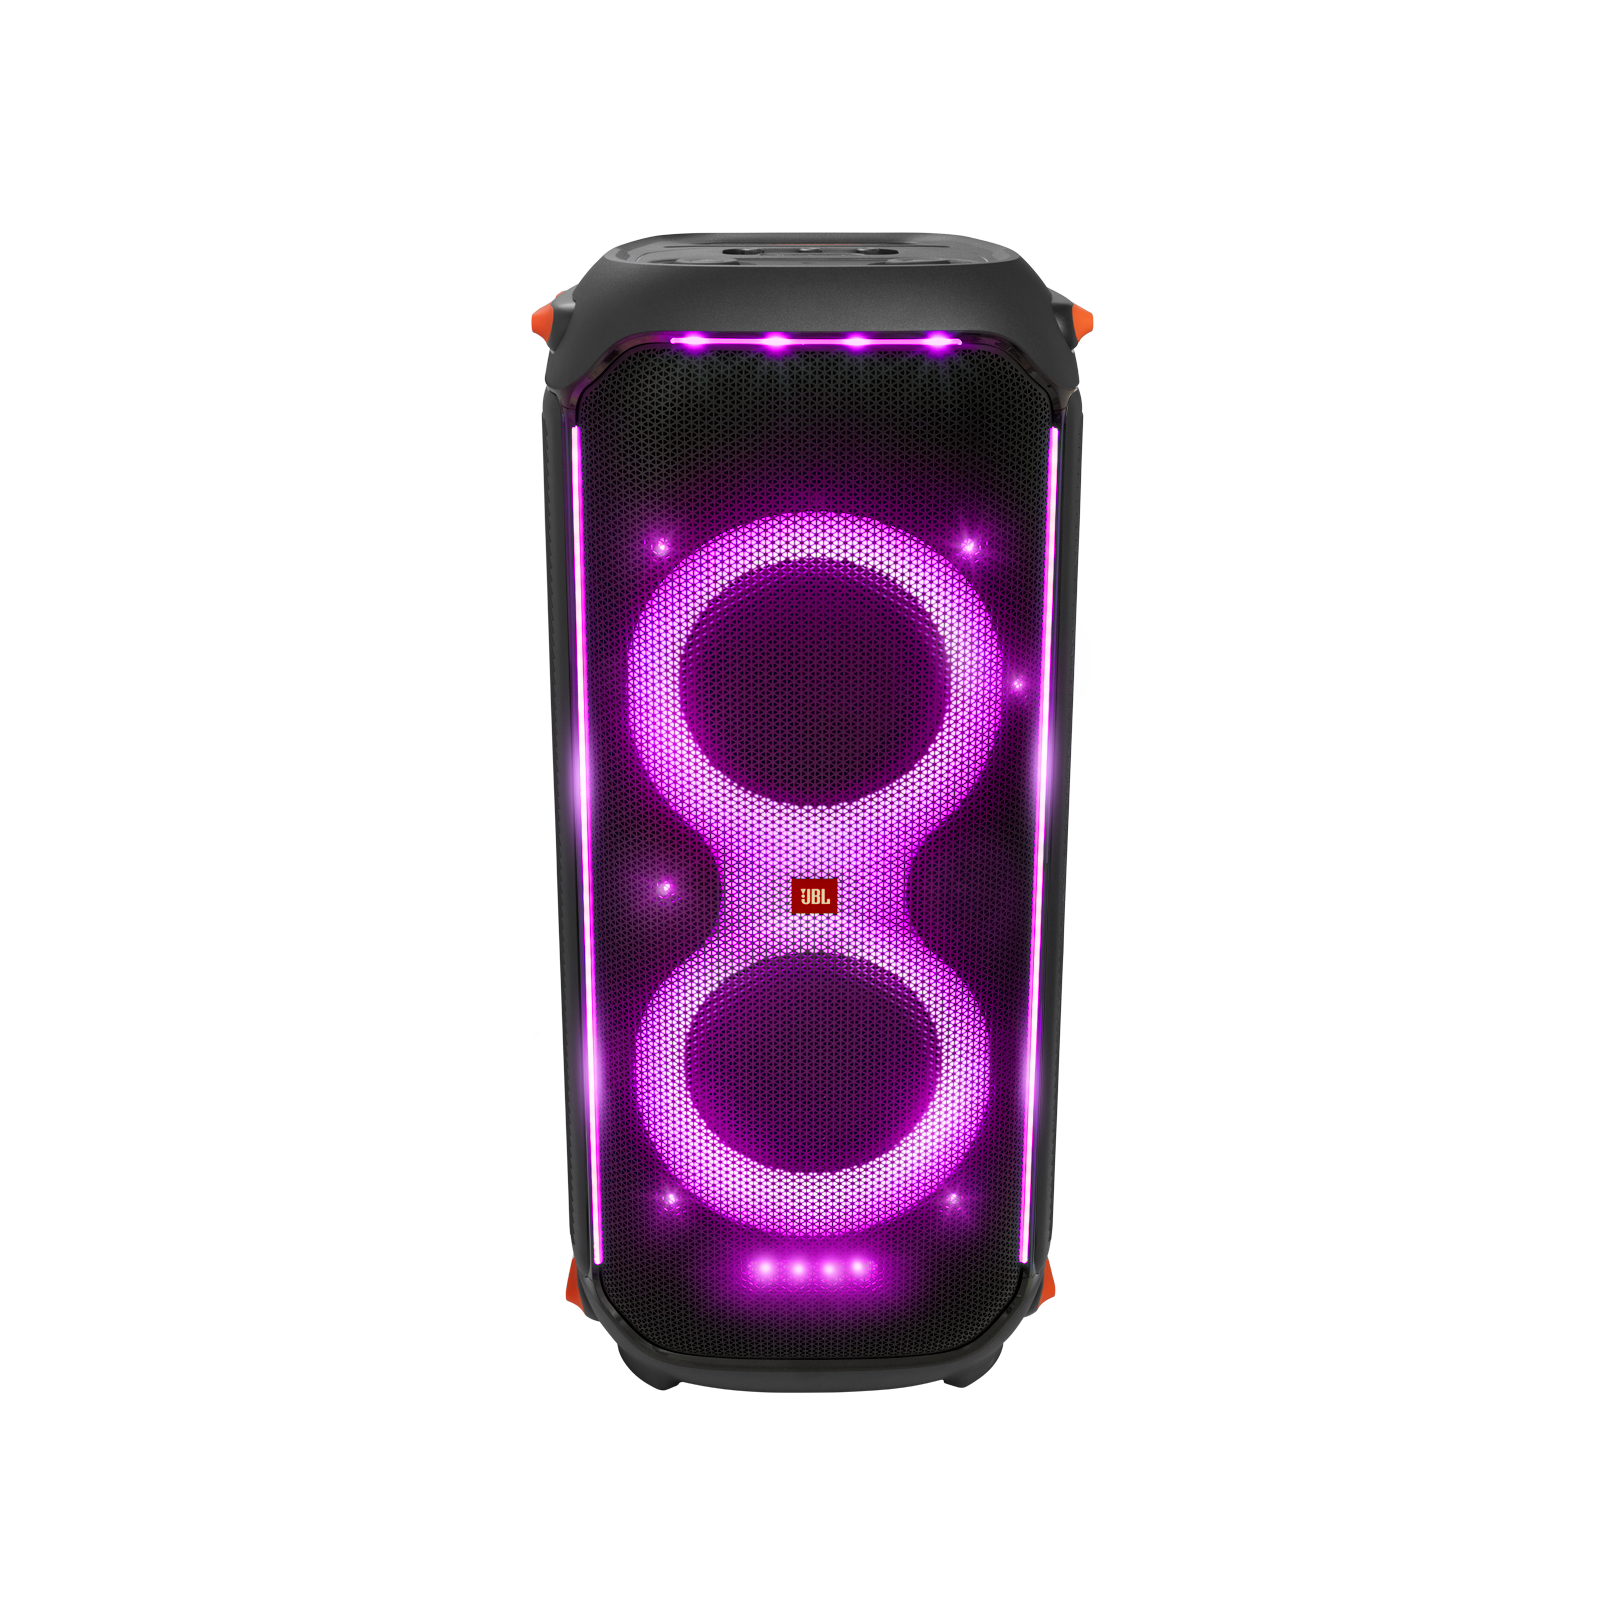 JBL Partybox 710 - Black - Party speaker with 800W RMS powerful sound, built-in lights and splashproof design. - Front